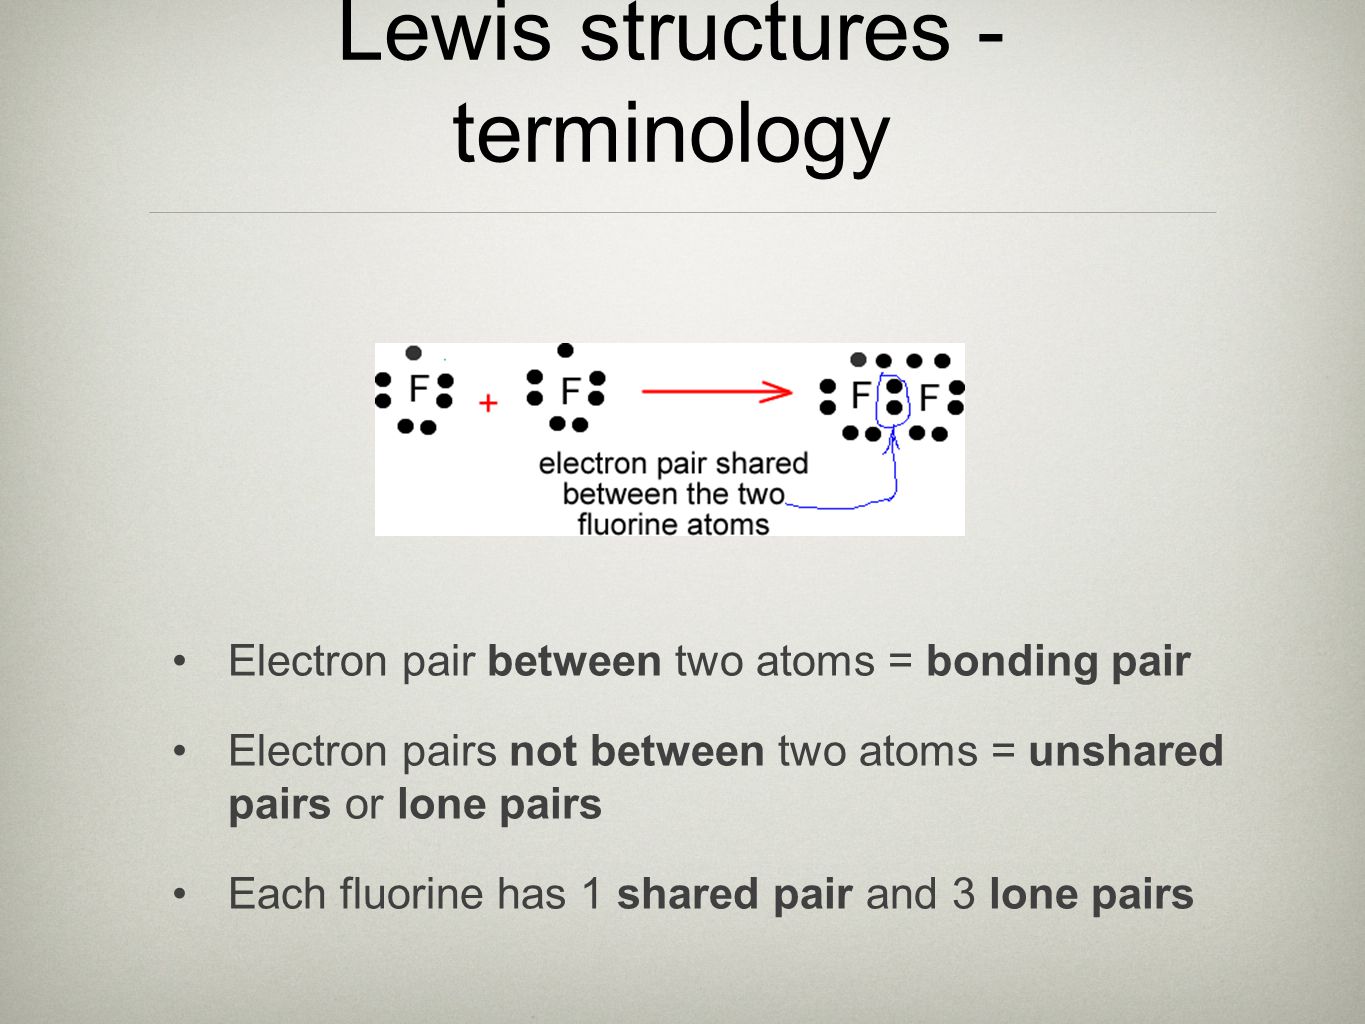 Lewis structures - terminology Electron pair between two atoms = bonding pair Electron pairs not between two atoms = unshared pairs or lone pairs Each fluorine has 1 shared pair and 3 lone pairs